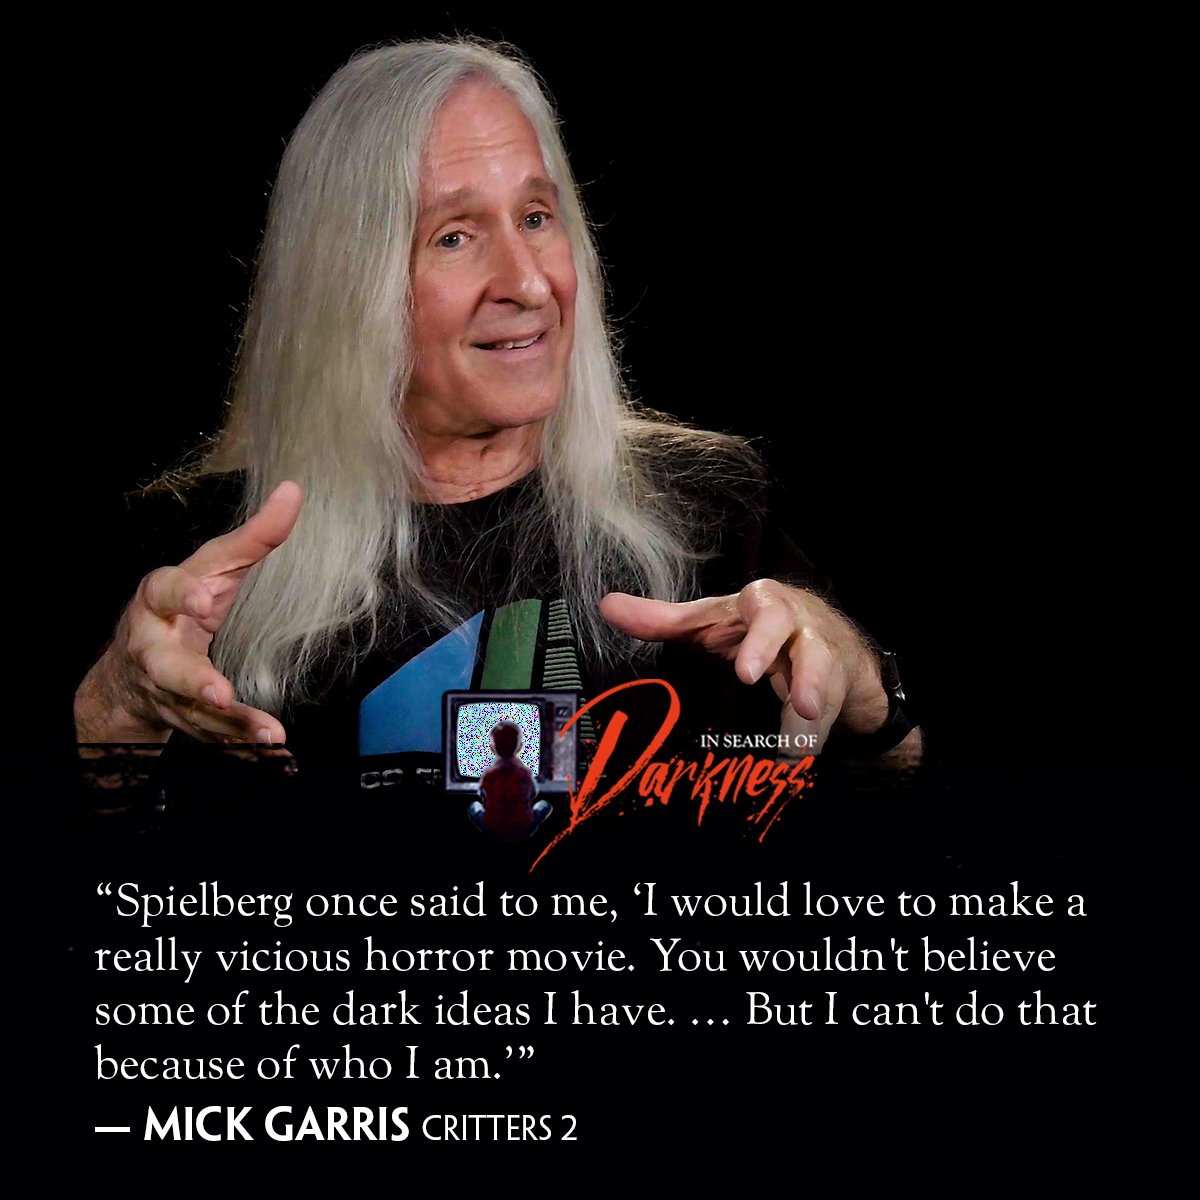 Hear from Mick Garris and more than 40 other icons of #80shorror in #InSearchOfDarkness. 

Join us now 👉 igg.me/at/ISOD

Campaign ends March 31st  

 #80s #scary  #80shorror #horrormovies #documentary #horrorfans  #mickgarris @PostMortemMG